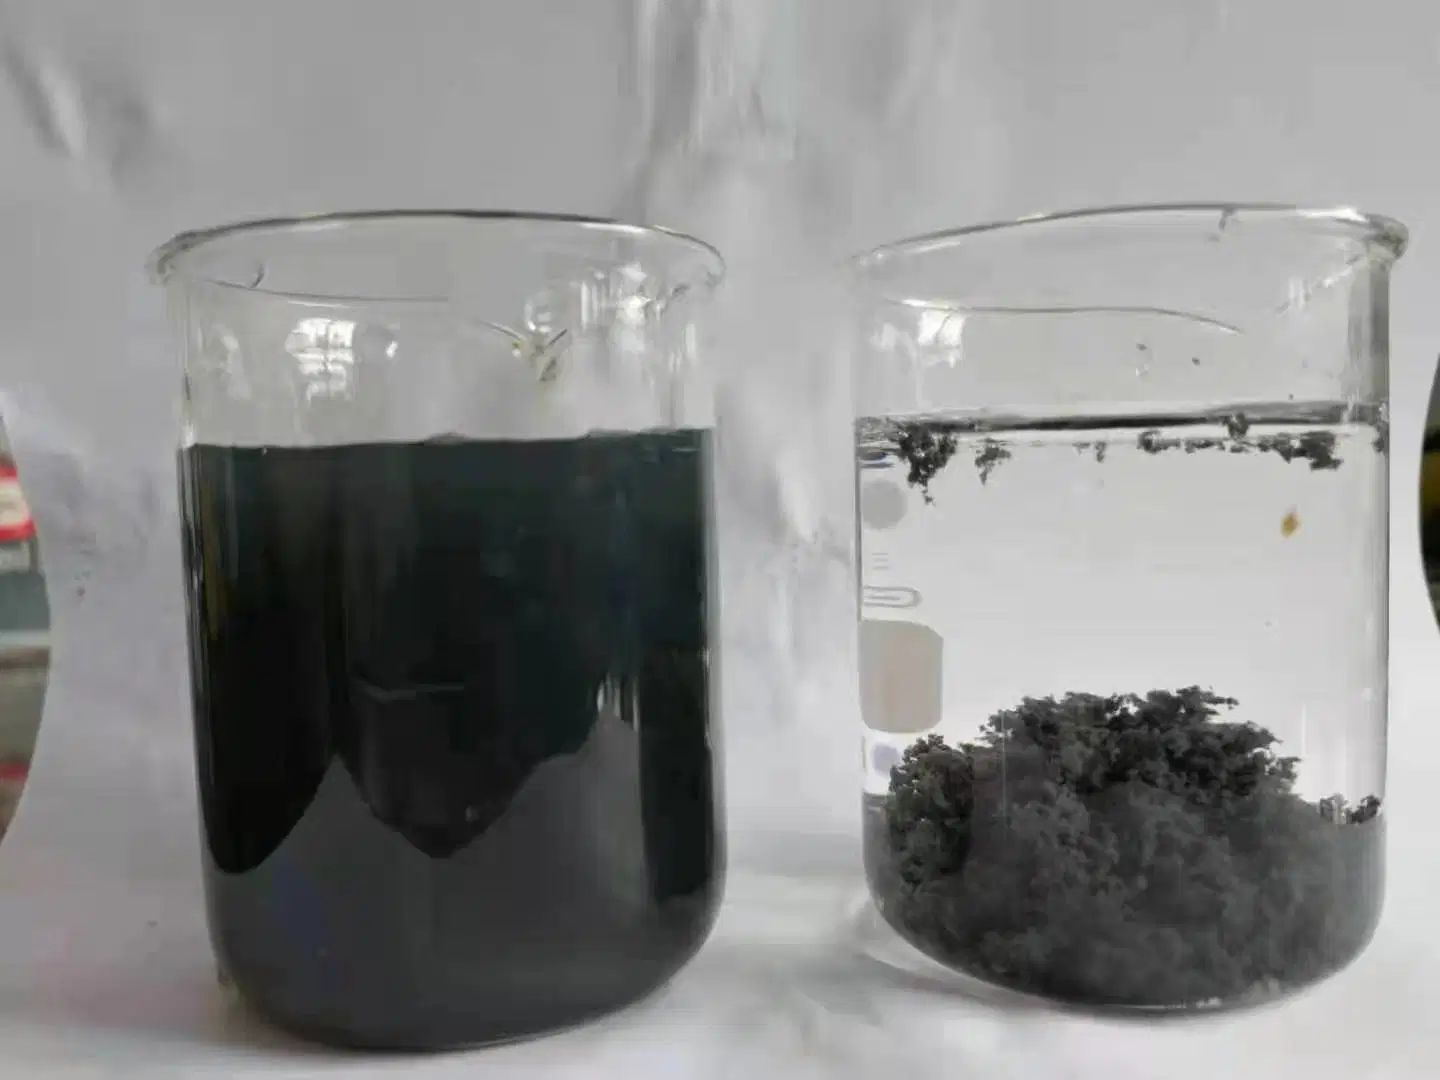 Best Sale Polymer Flocculant Water Treatment Oil Production Sewage Chemical Polyacrylamide Powder